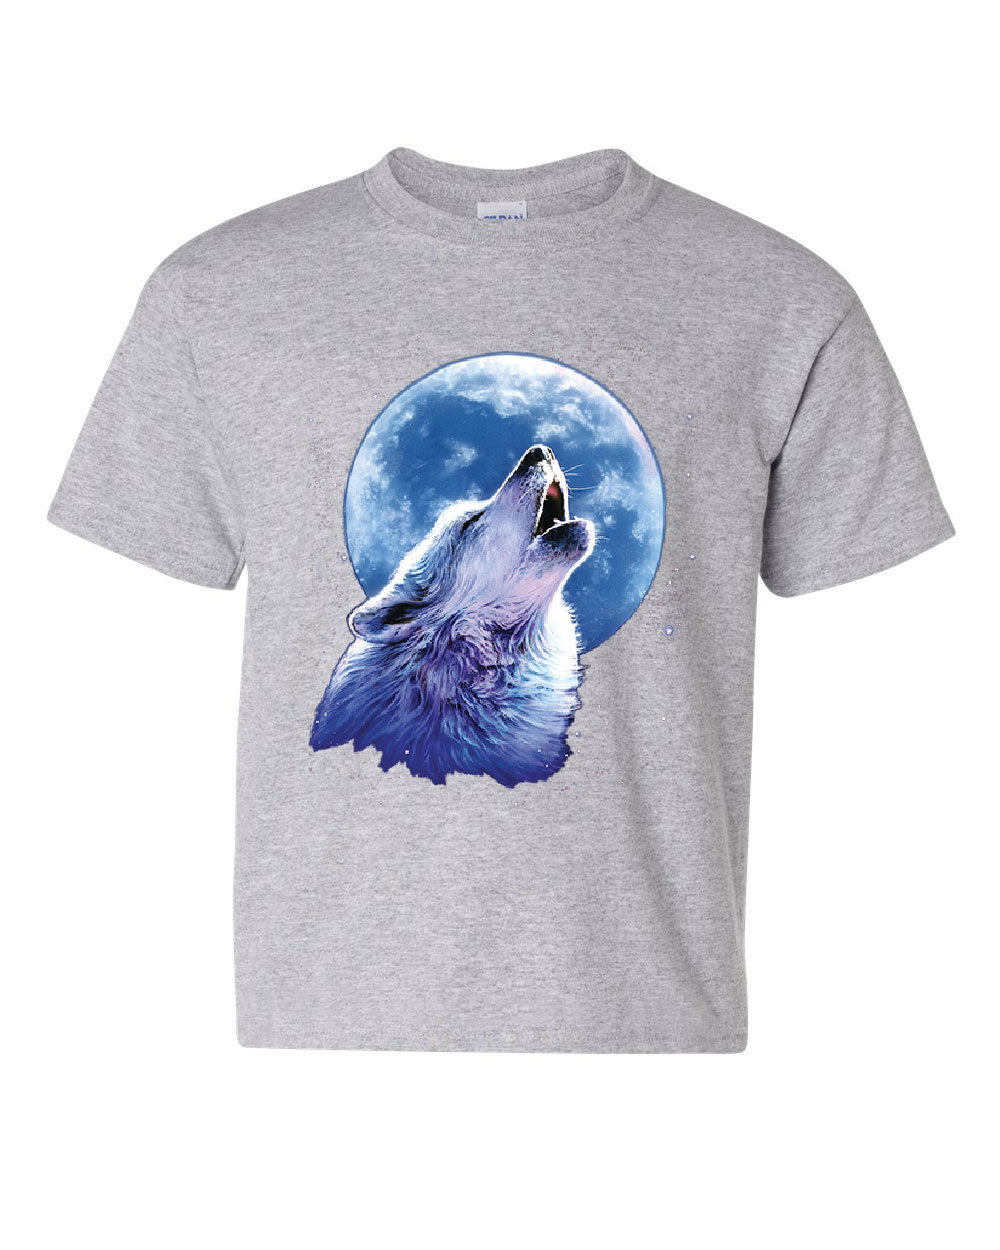 Call of the Wild Youth T-Shirt Lone Wolf Howling at the Moon Wildlife ...